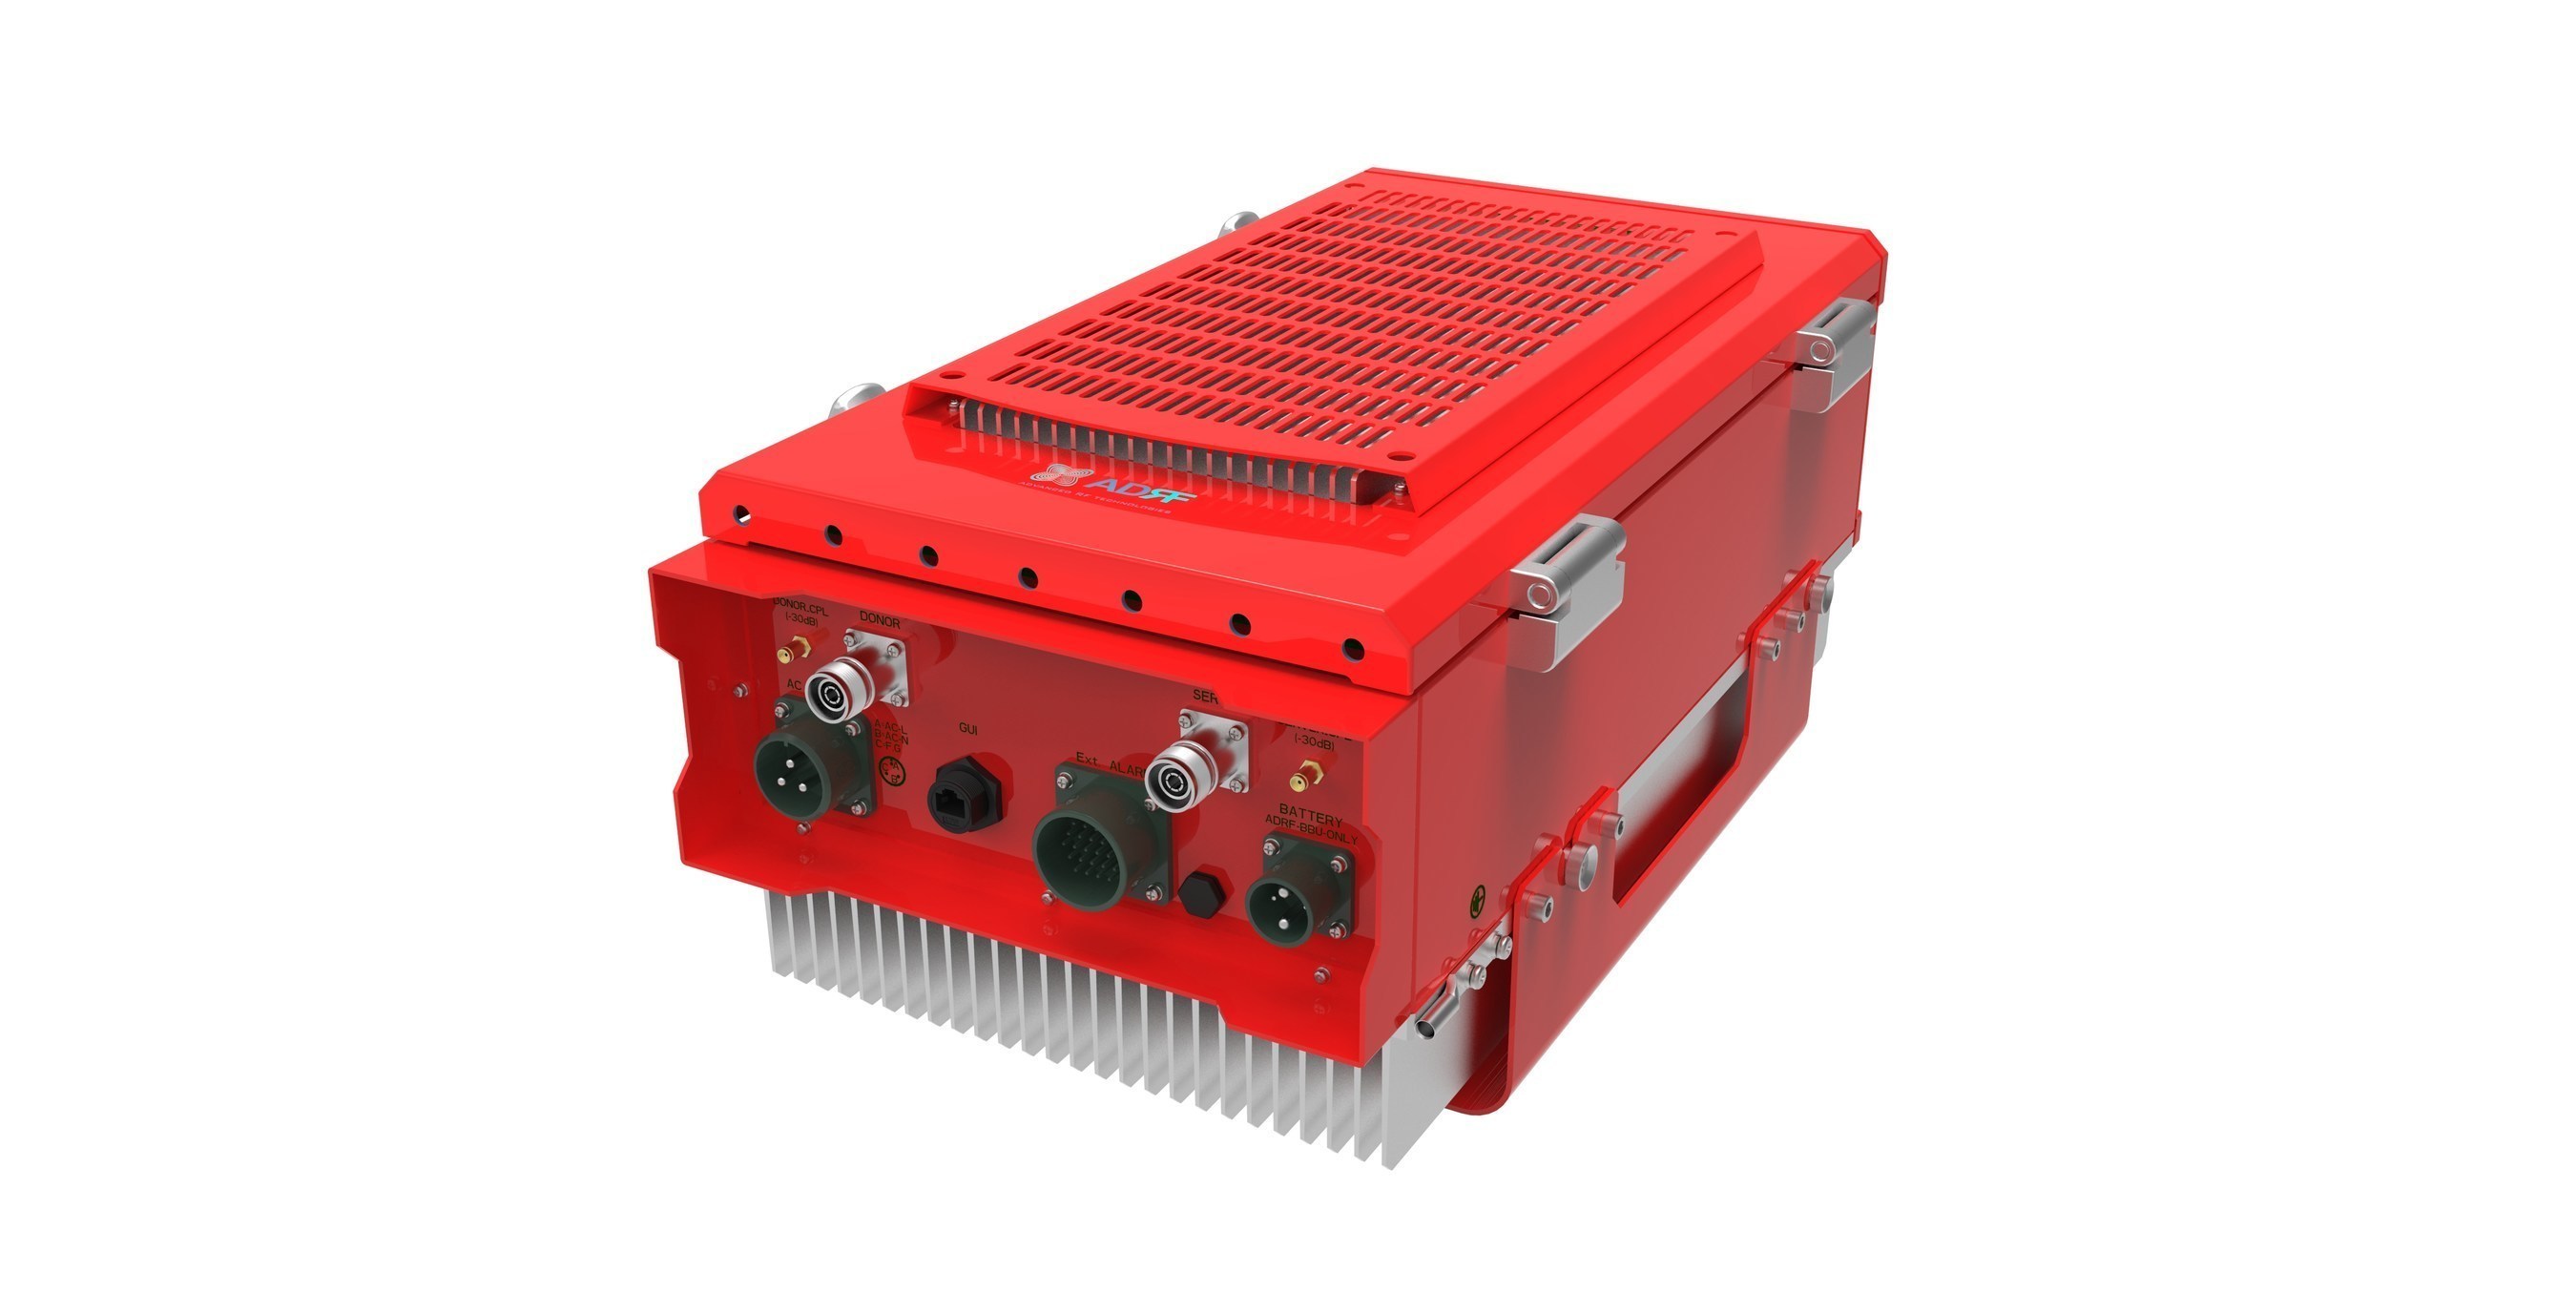 ADRF's PSR-78-9533 is fully compliant with the latest IFC and NFPA codes and it supports Public Safety 700 MHz and 800 MHz frequencies including FirstNet.